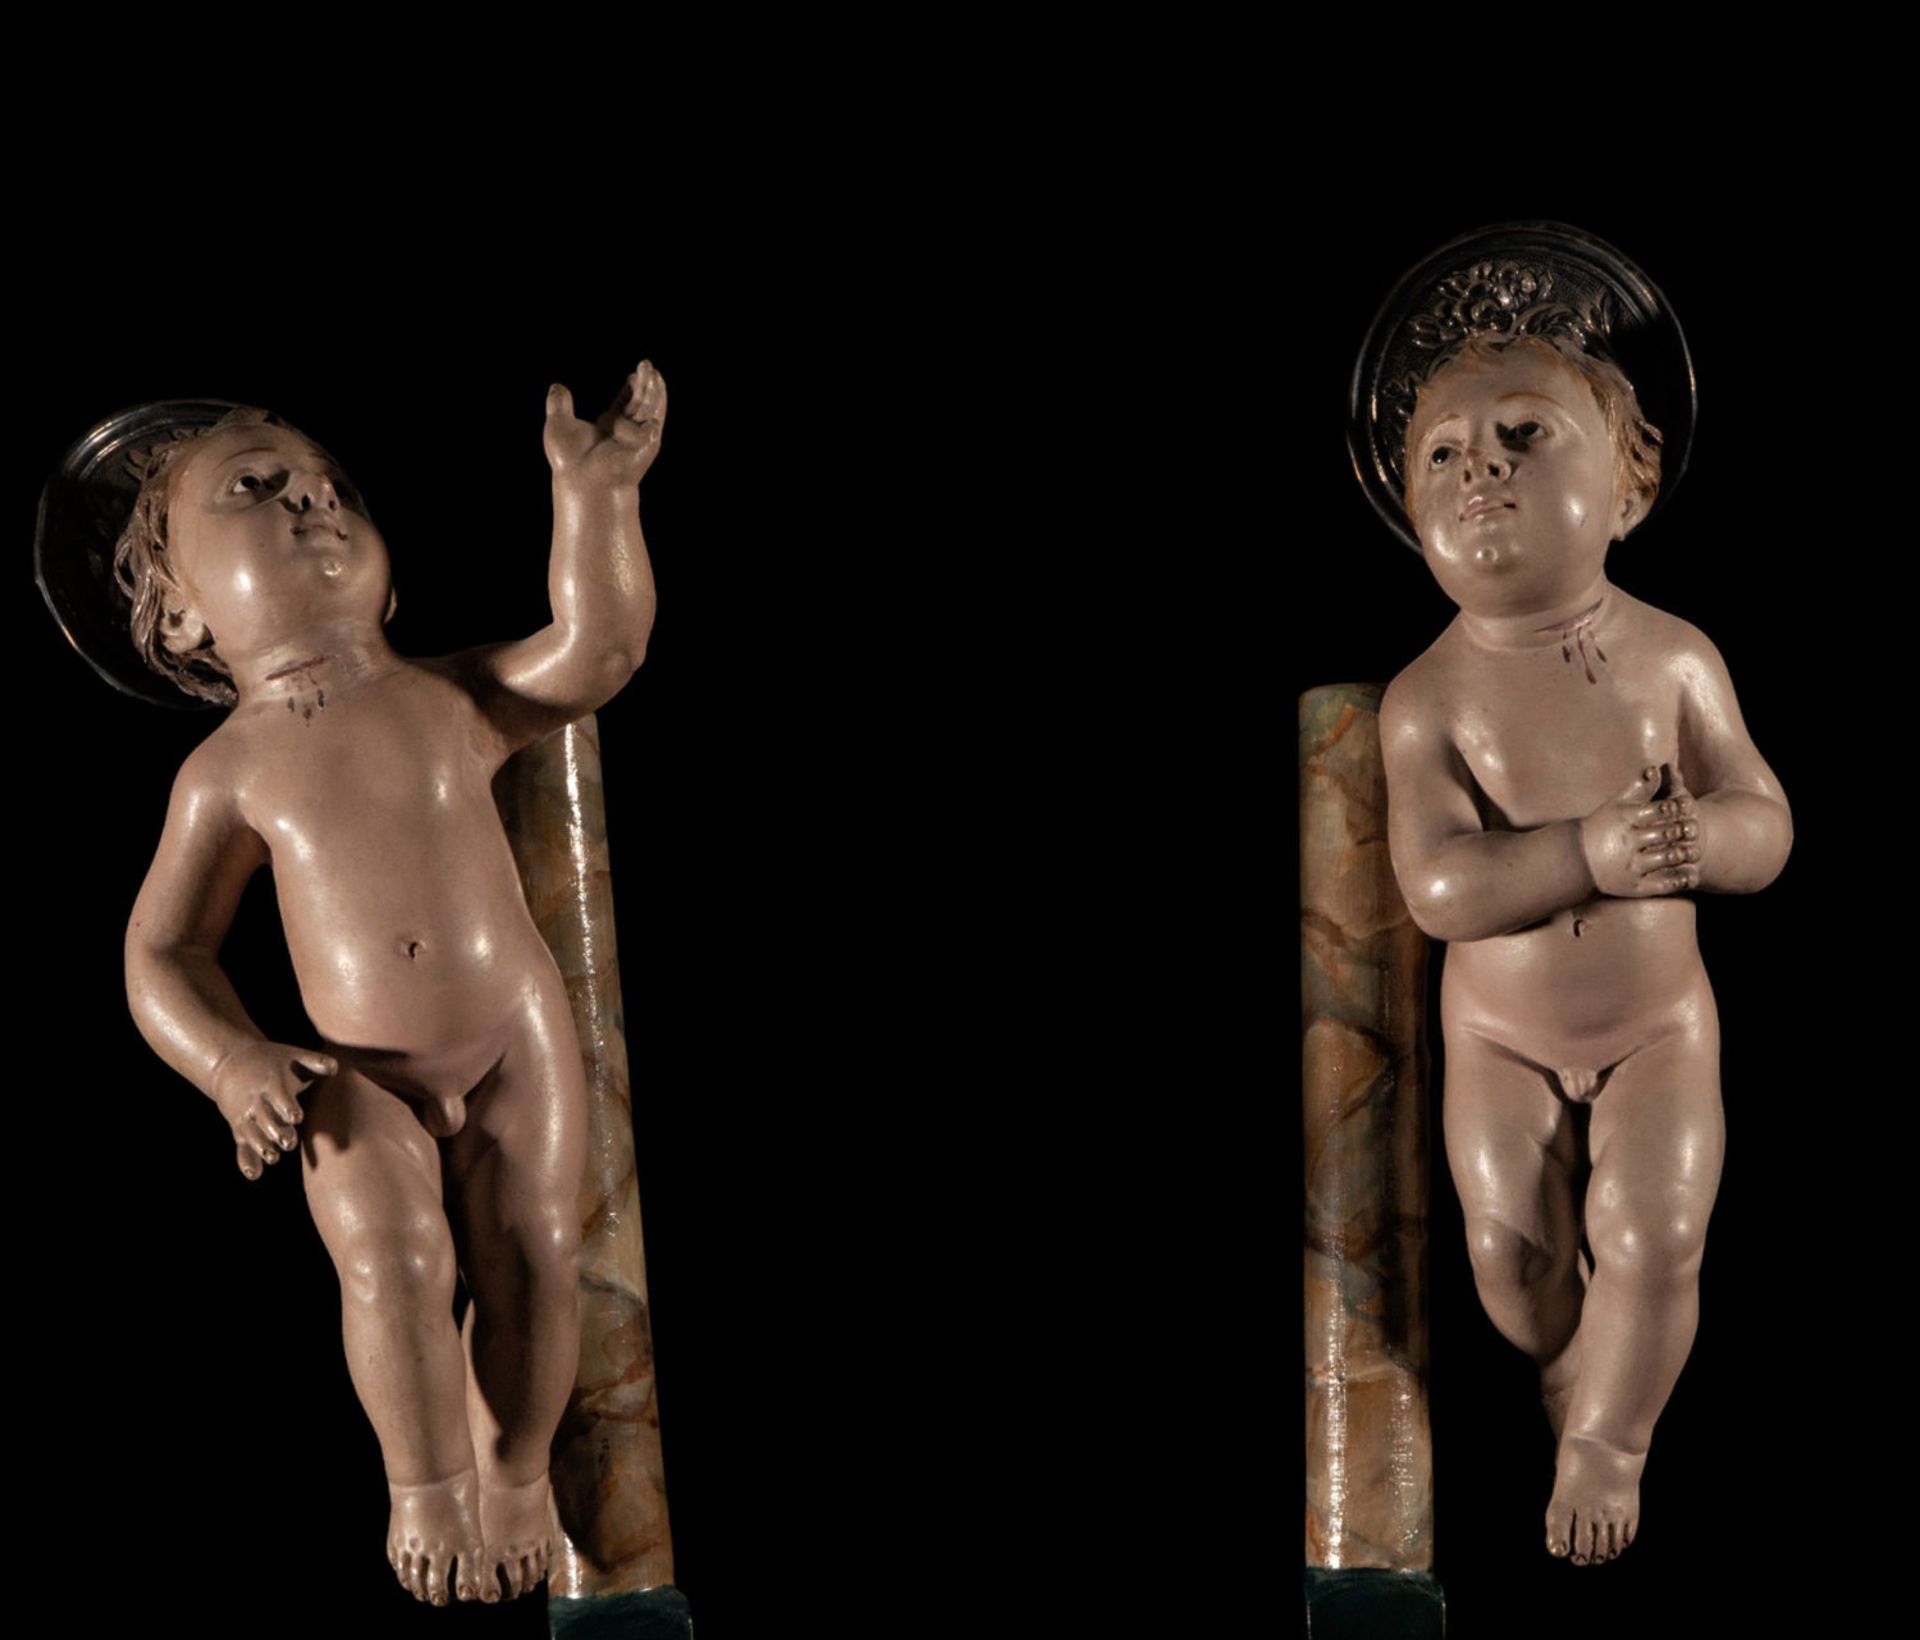 Pair of Neapolitan Holy Children with silver crowns, 18th century, Italy, Naples - Image 3 of 6